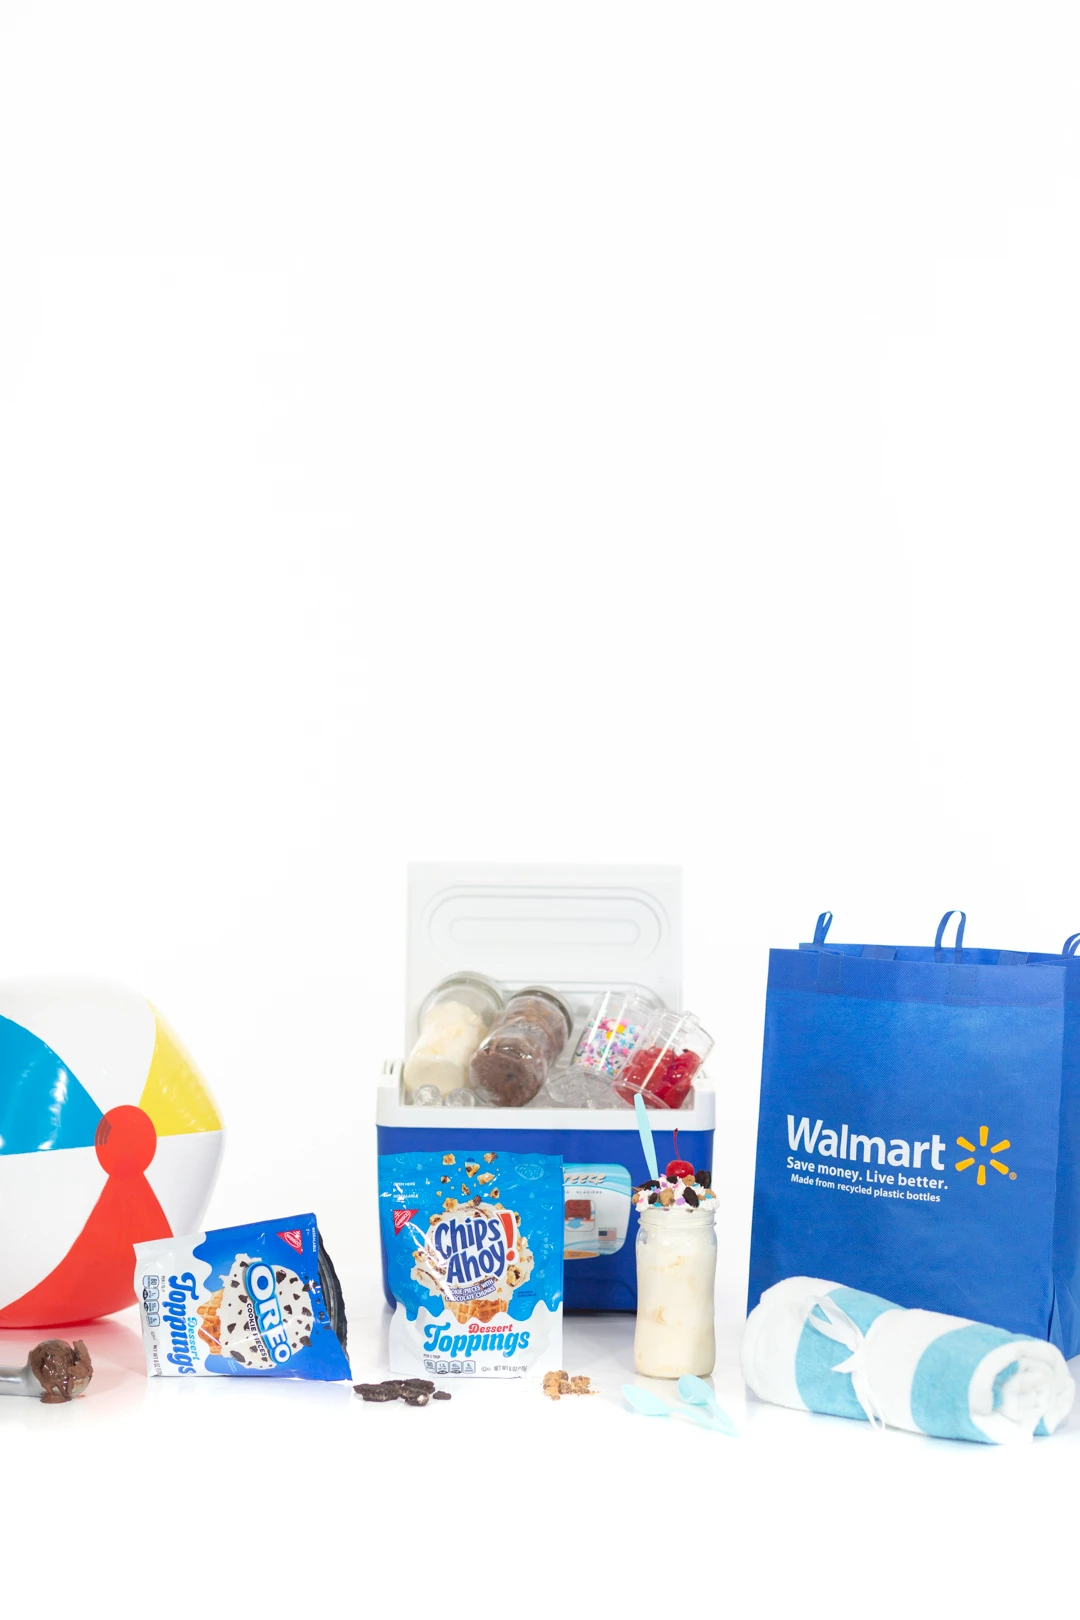 Items needed for portable sundaes with ingredients from Walmart. Walmart reusable shopping back, beach ball and OREO and Chips Ahoy! Dessert Toppings